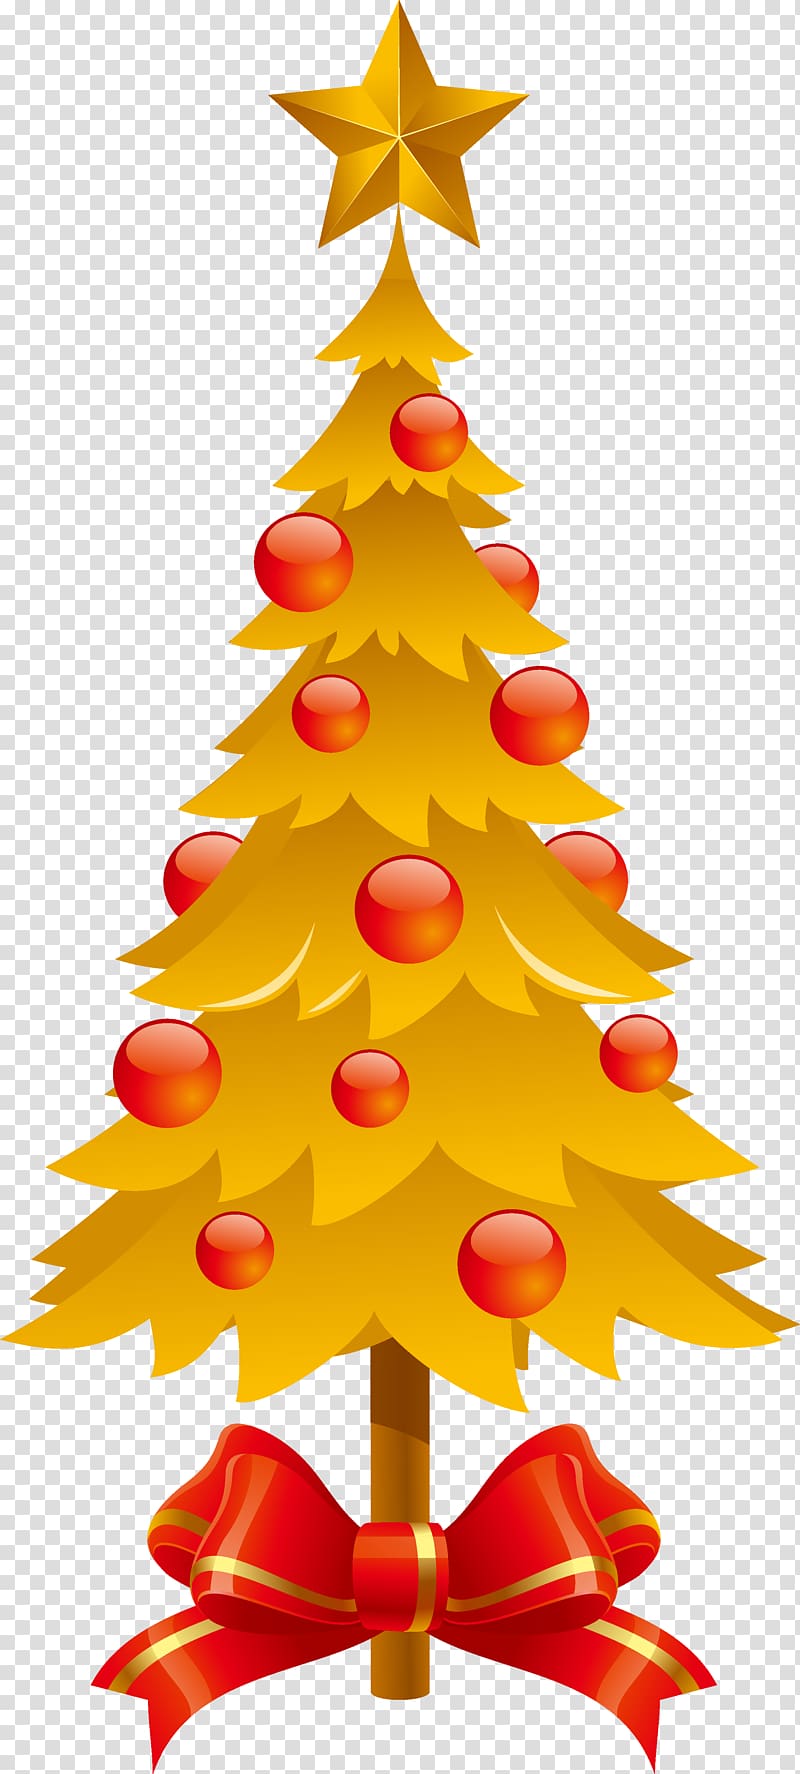 Christmas tree New Year tree, Christmas tree transparent background PNG clipart